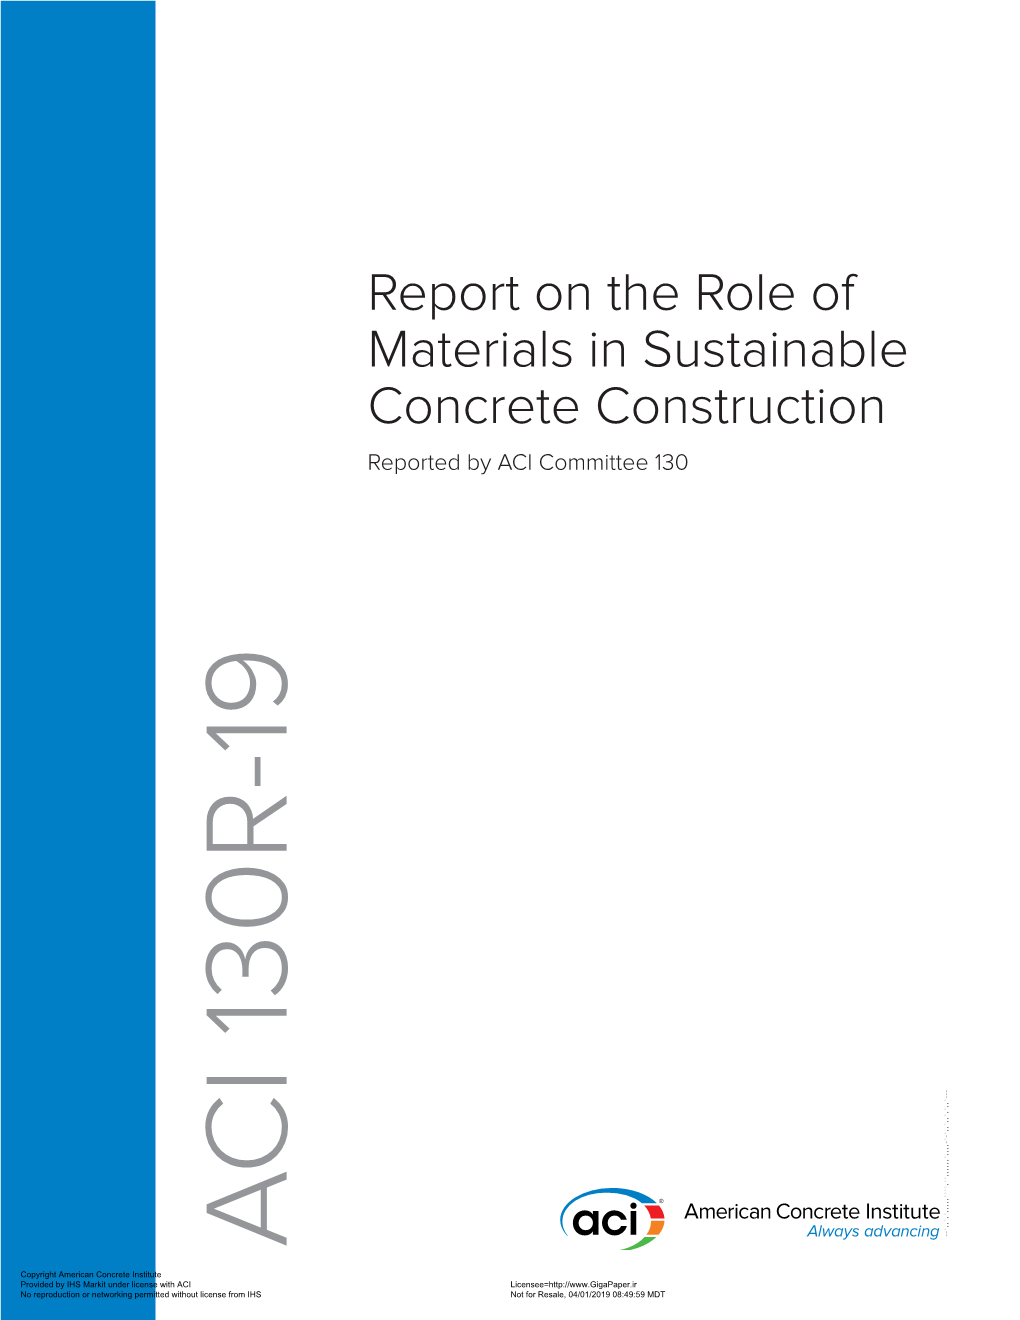 130R-19: Report on the Role of Materials in Sustainable Concrete Construction